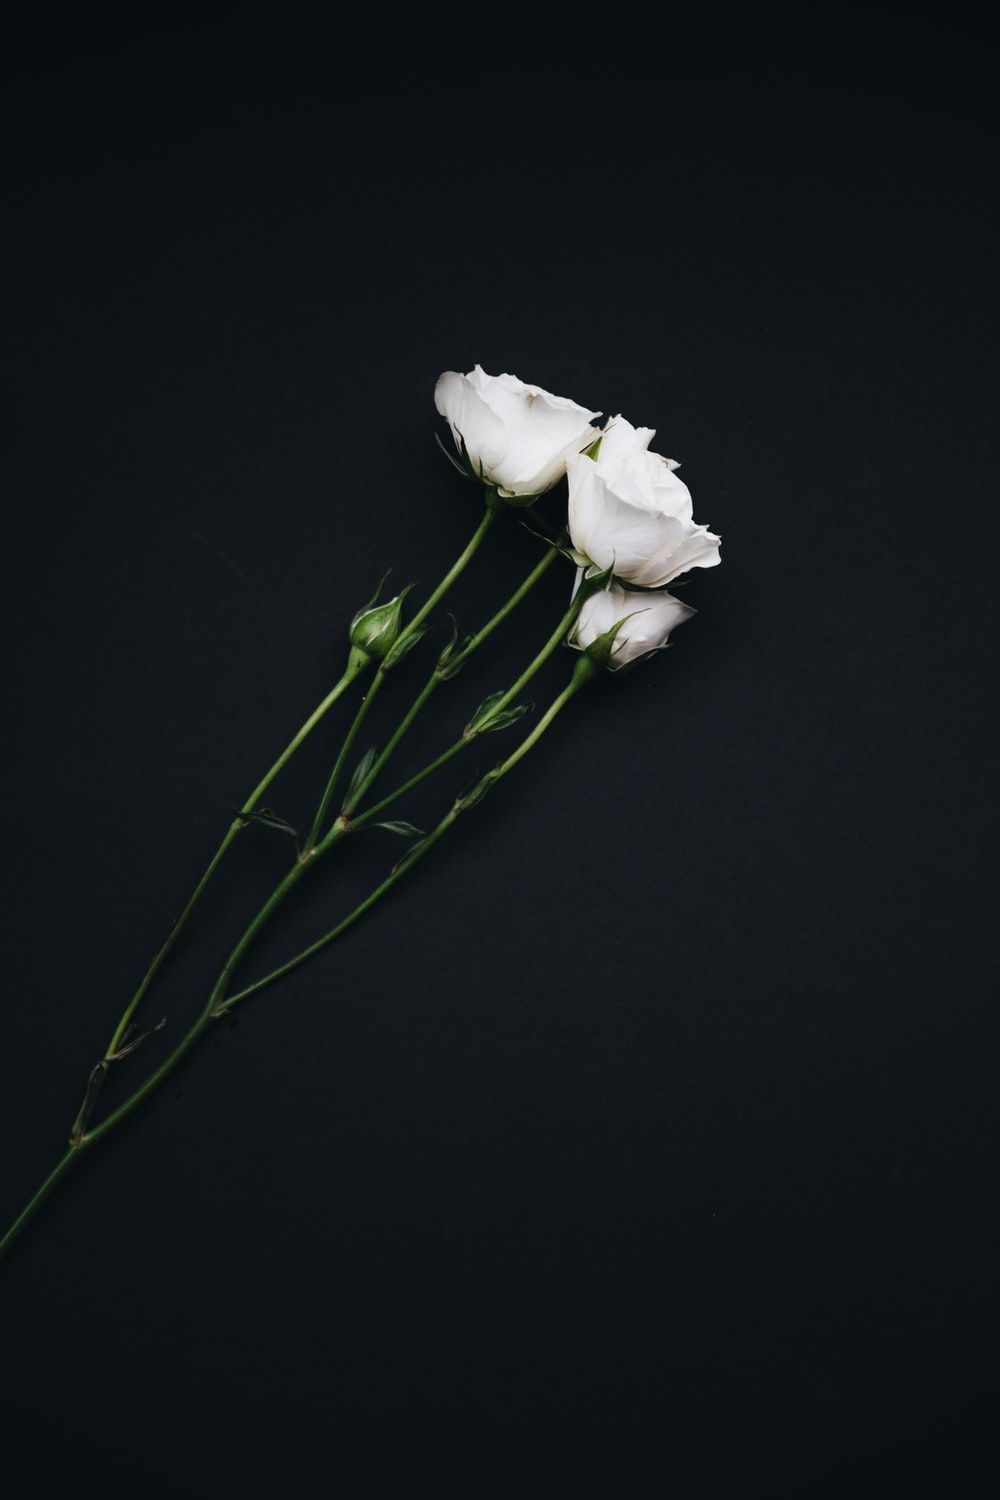 White Flower Picture. Download Free Image